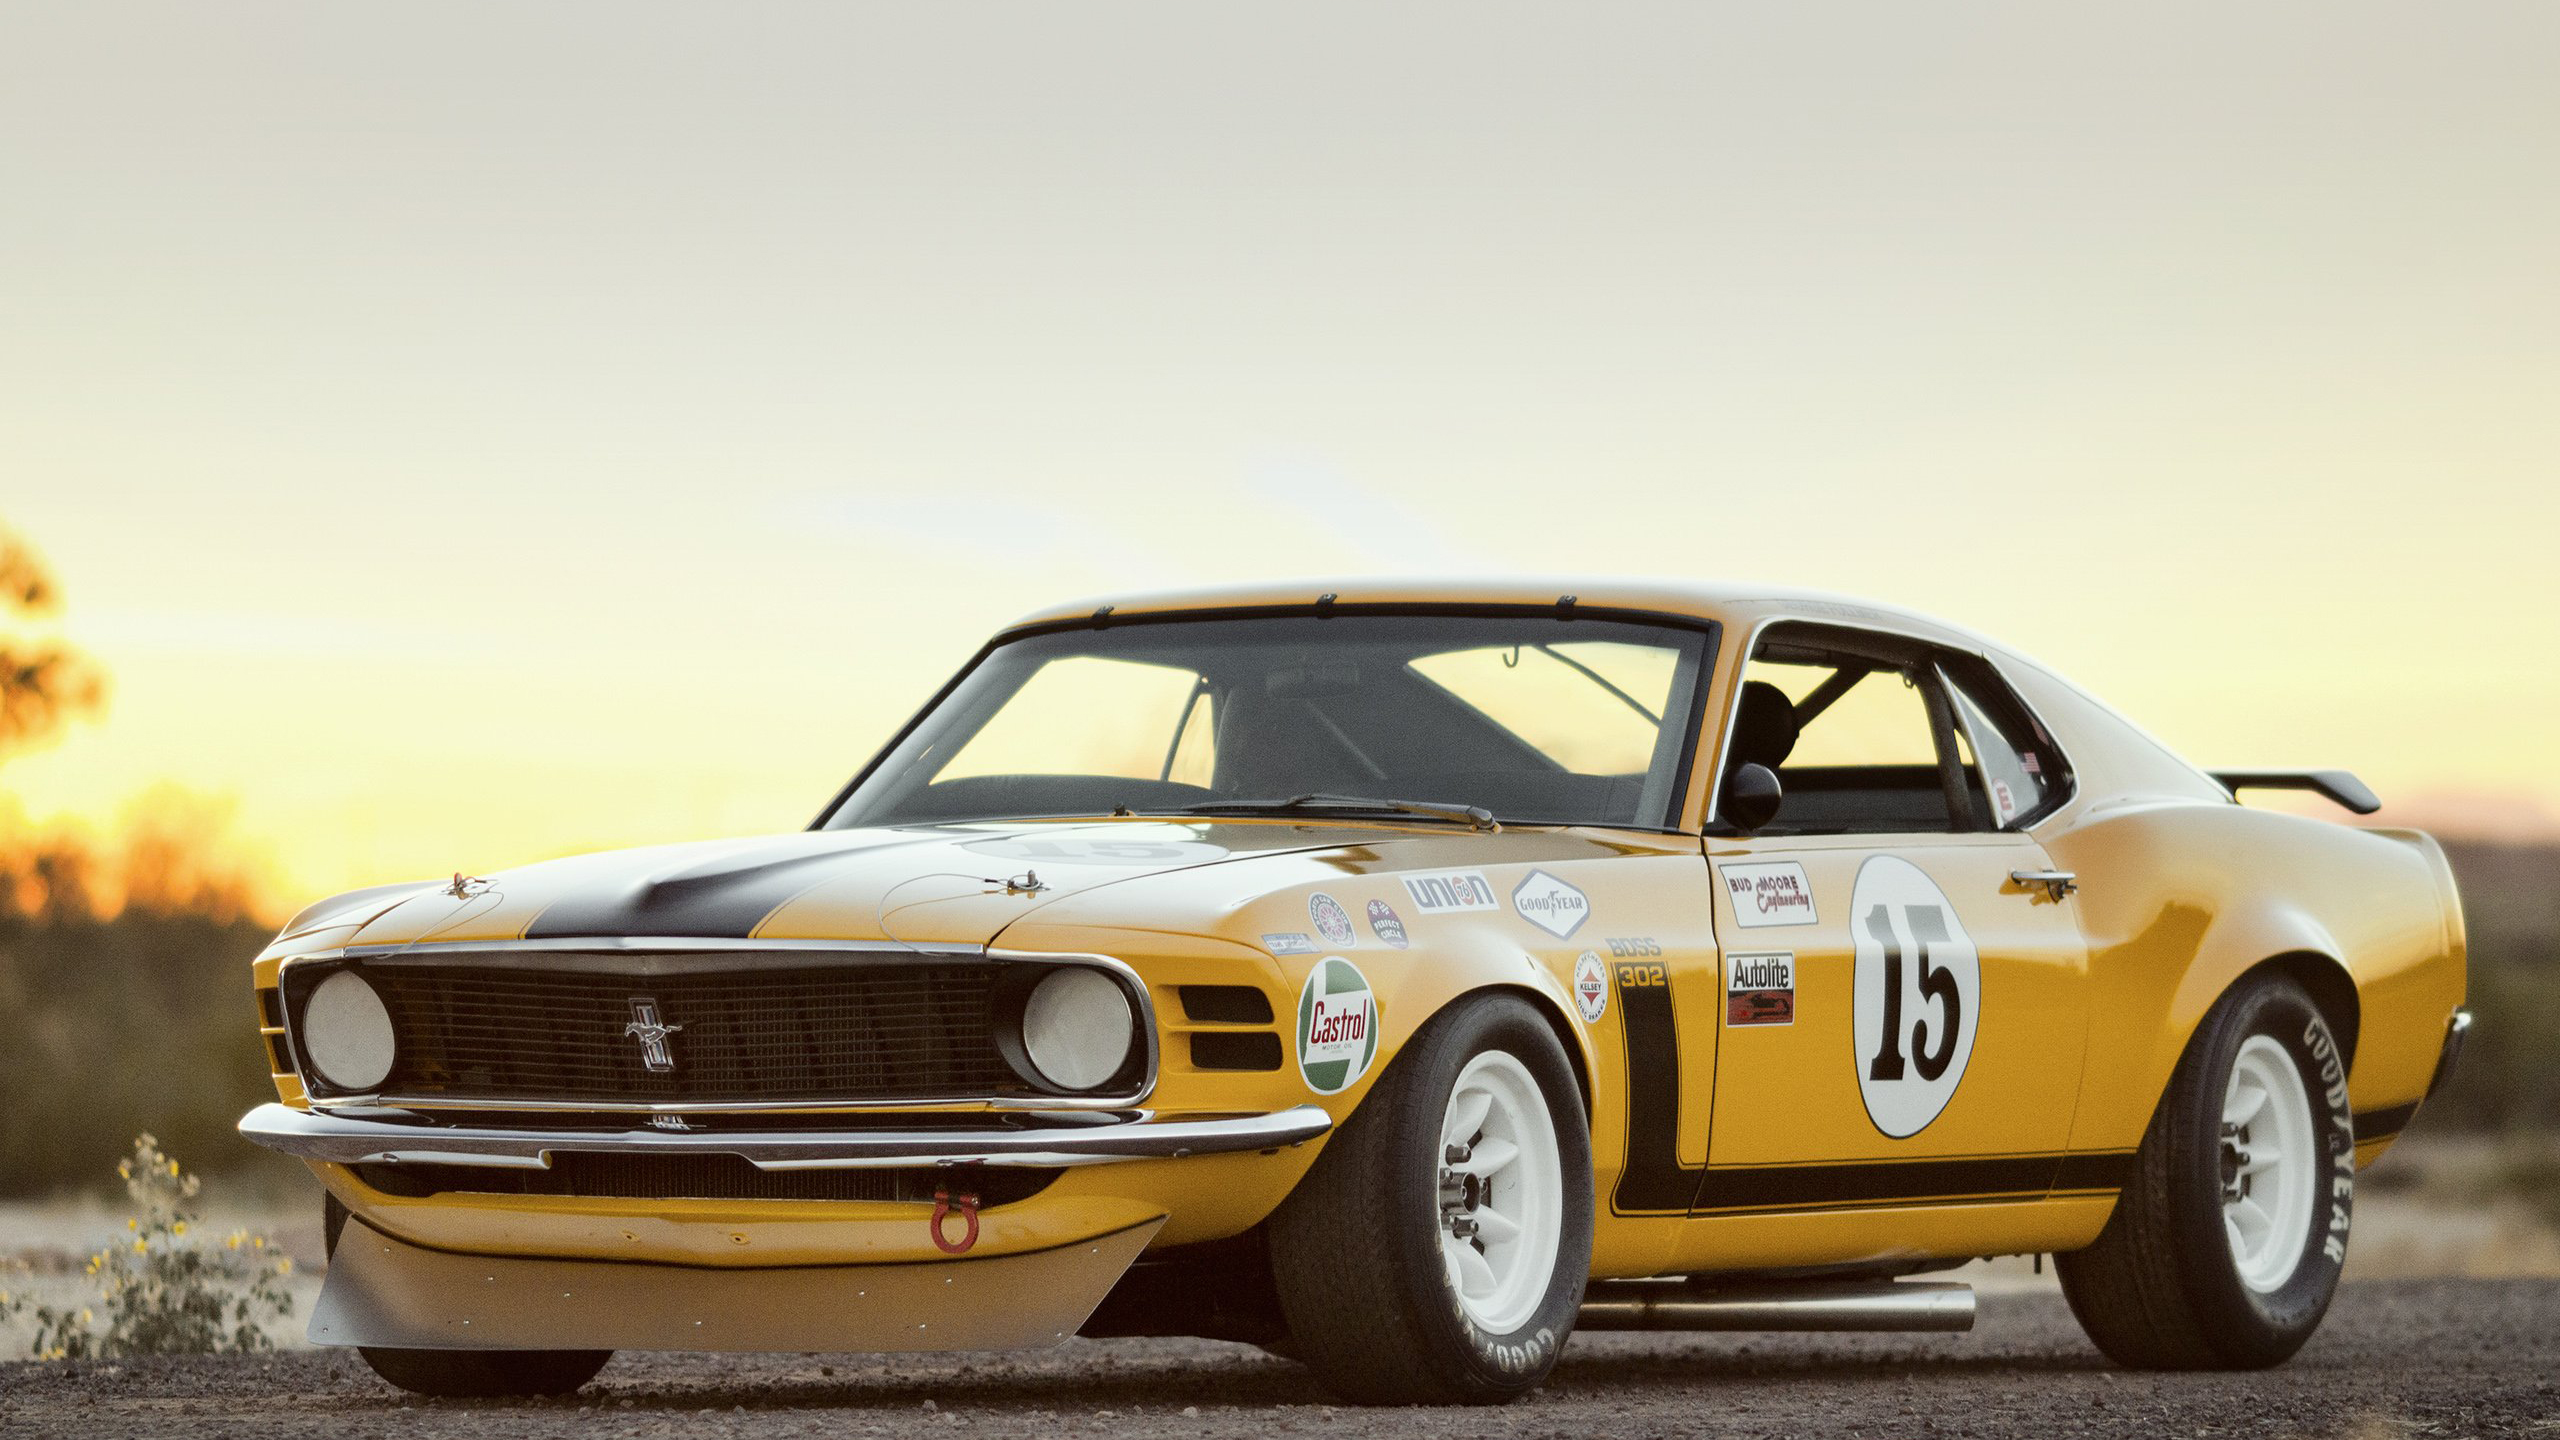 Car Ford Ford Mustang Ford Mustang Boss 302 Muscle Car Race Car Vehicle Yellow Car 2560x1440